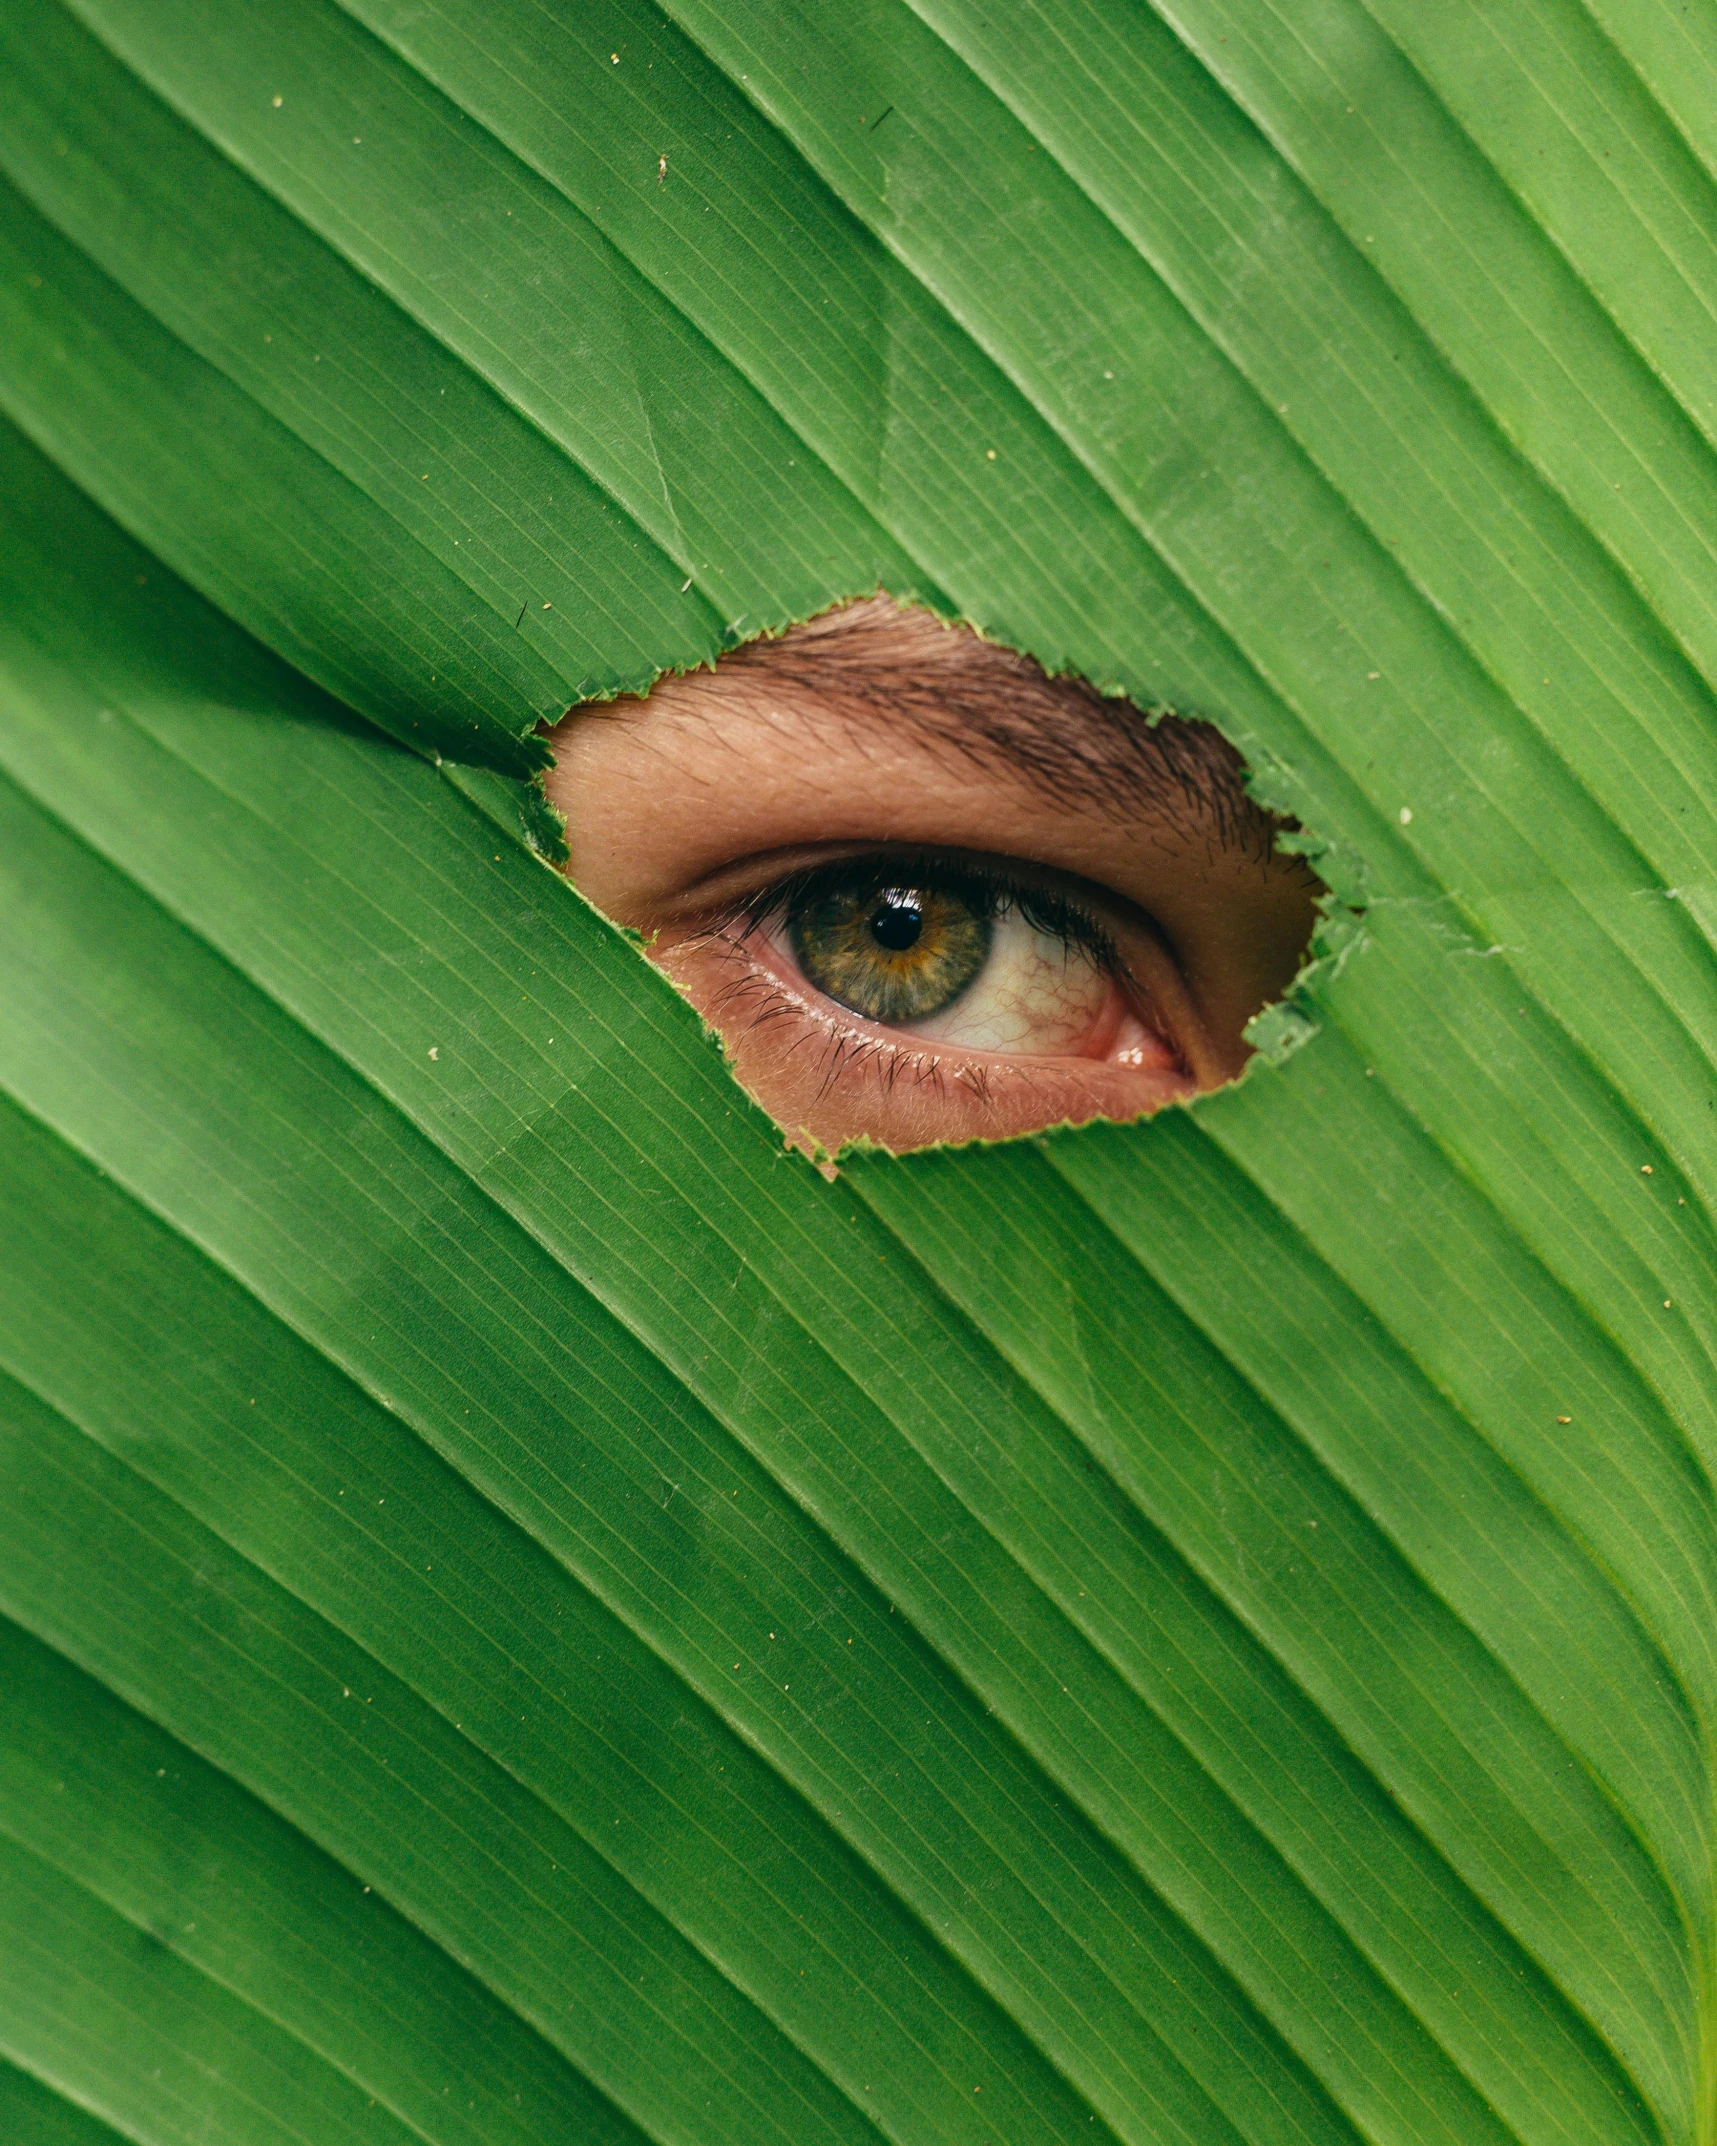 the eye is looking through the hole in the leaf